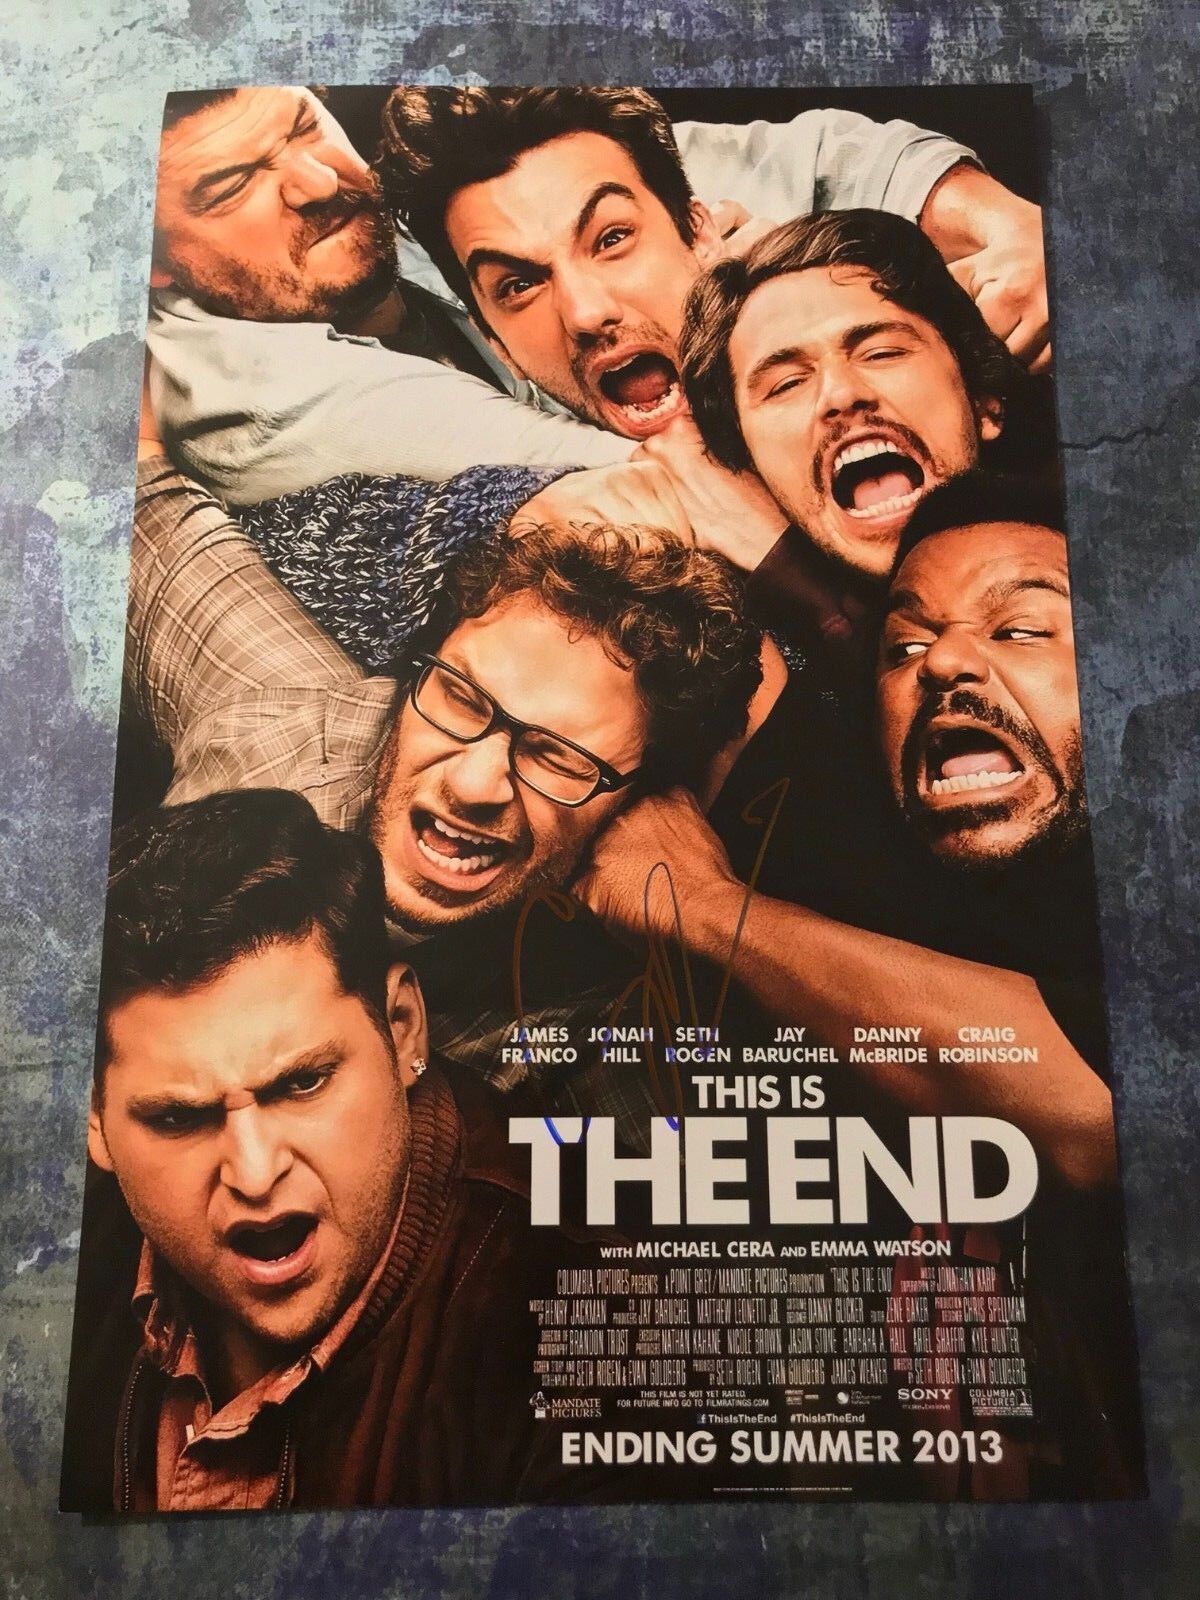 GFA This is the End * CRAIG ROBINSON * Signed 12x18 Photo Poster painting PROOF AD1 COA